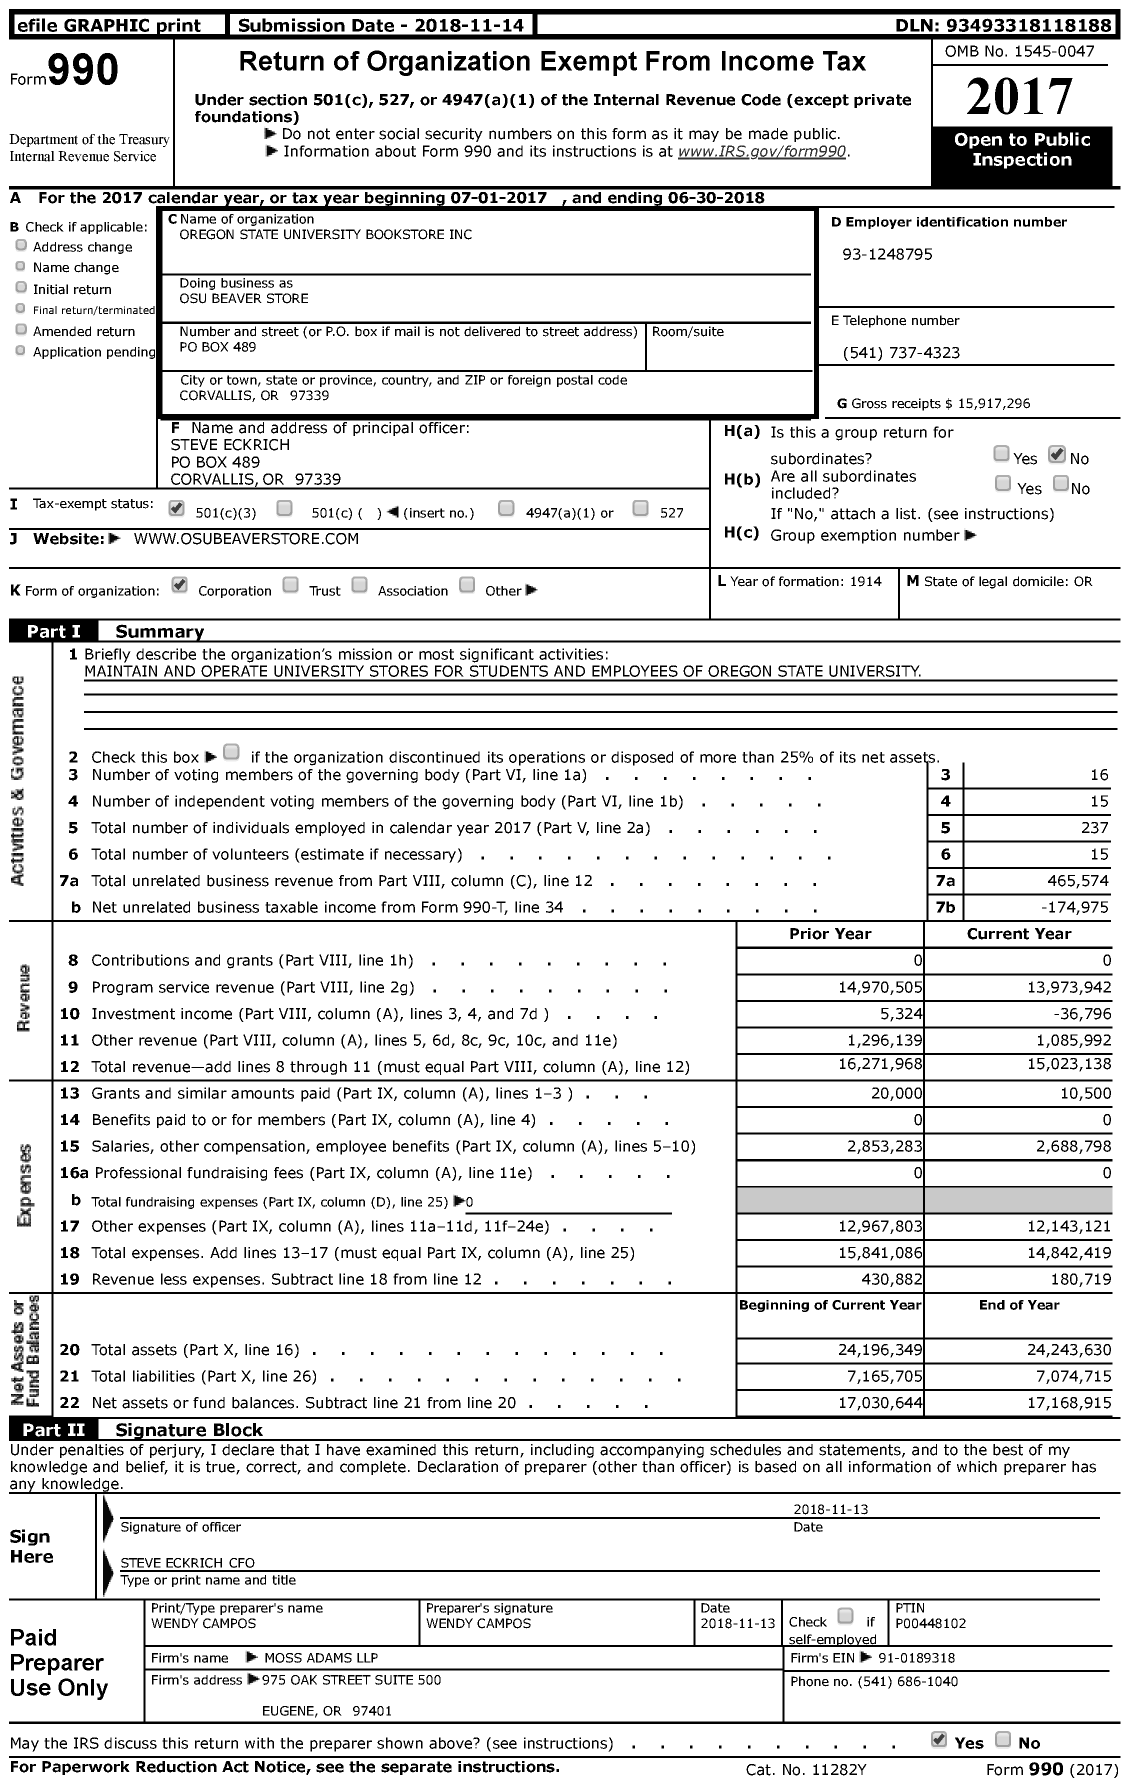 Image of first page of 2017 Form 990 for OSU Beaver Store